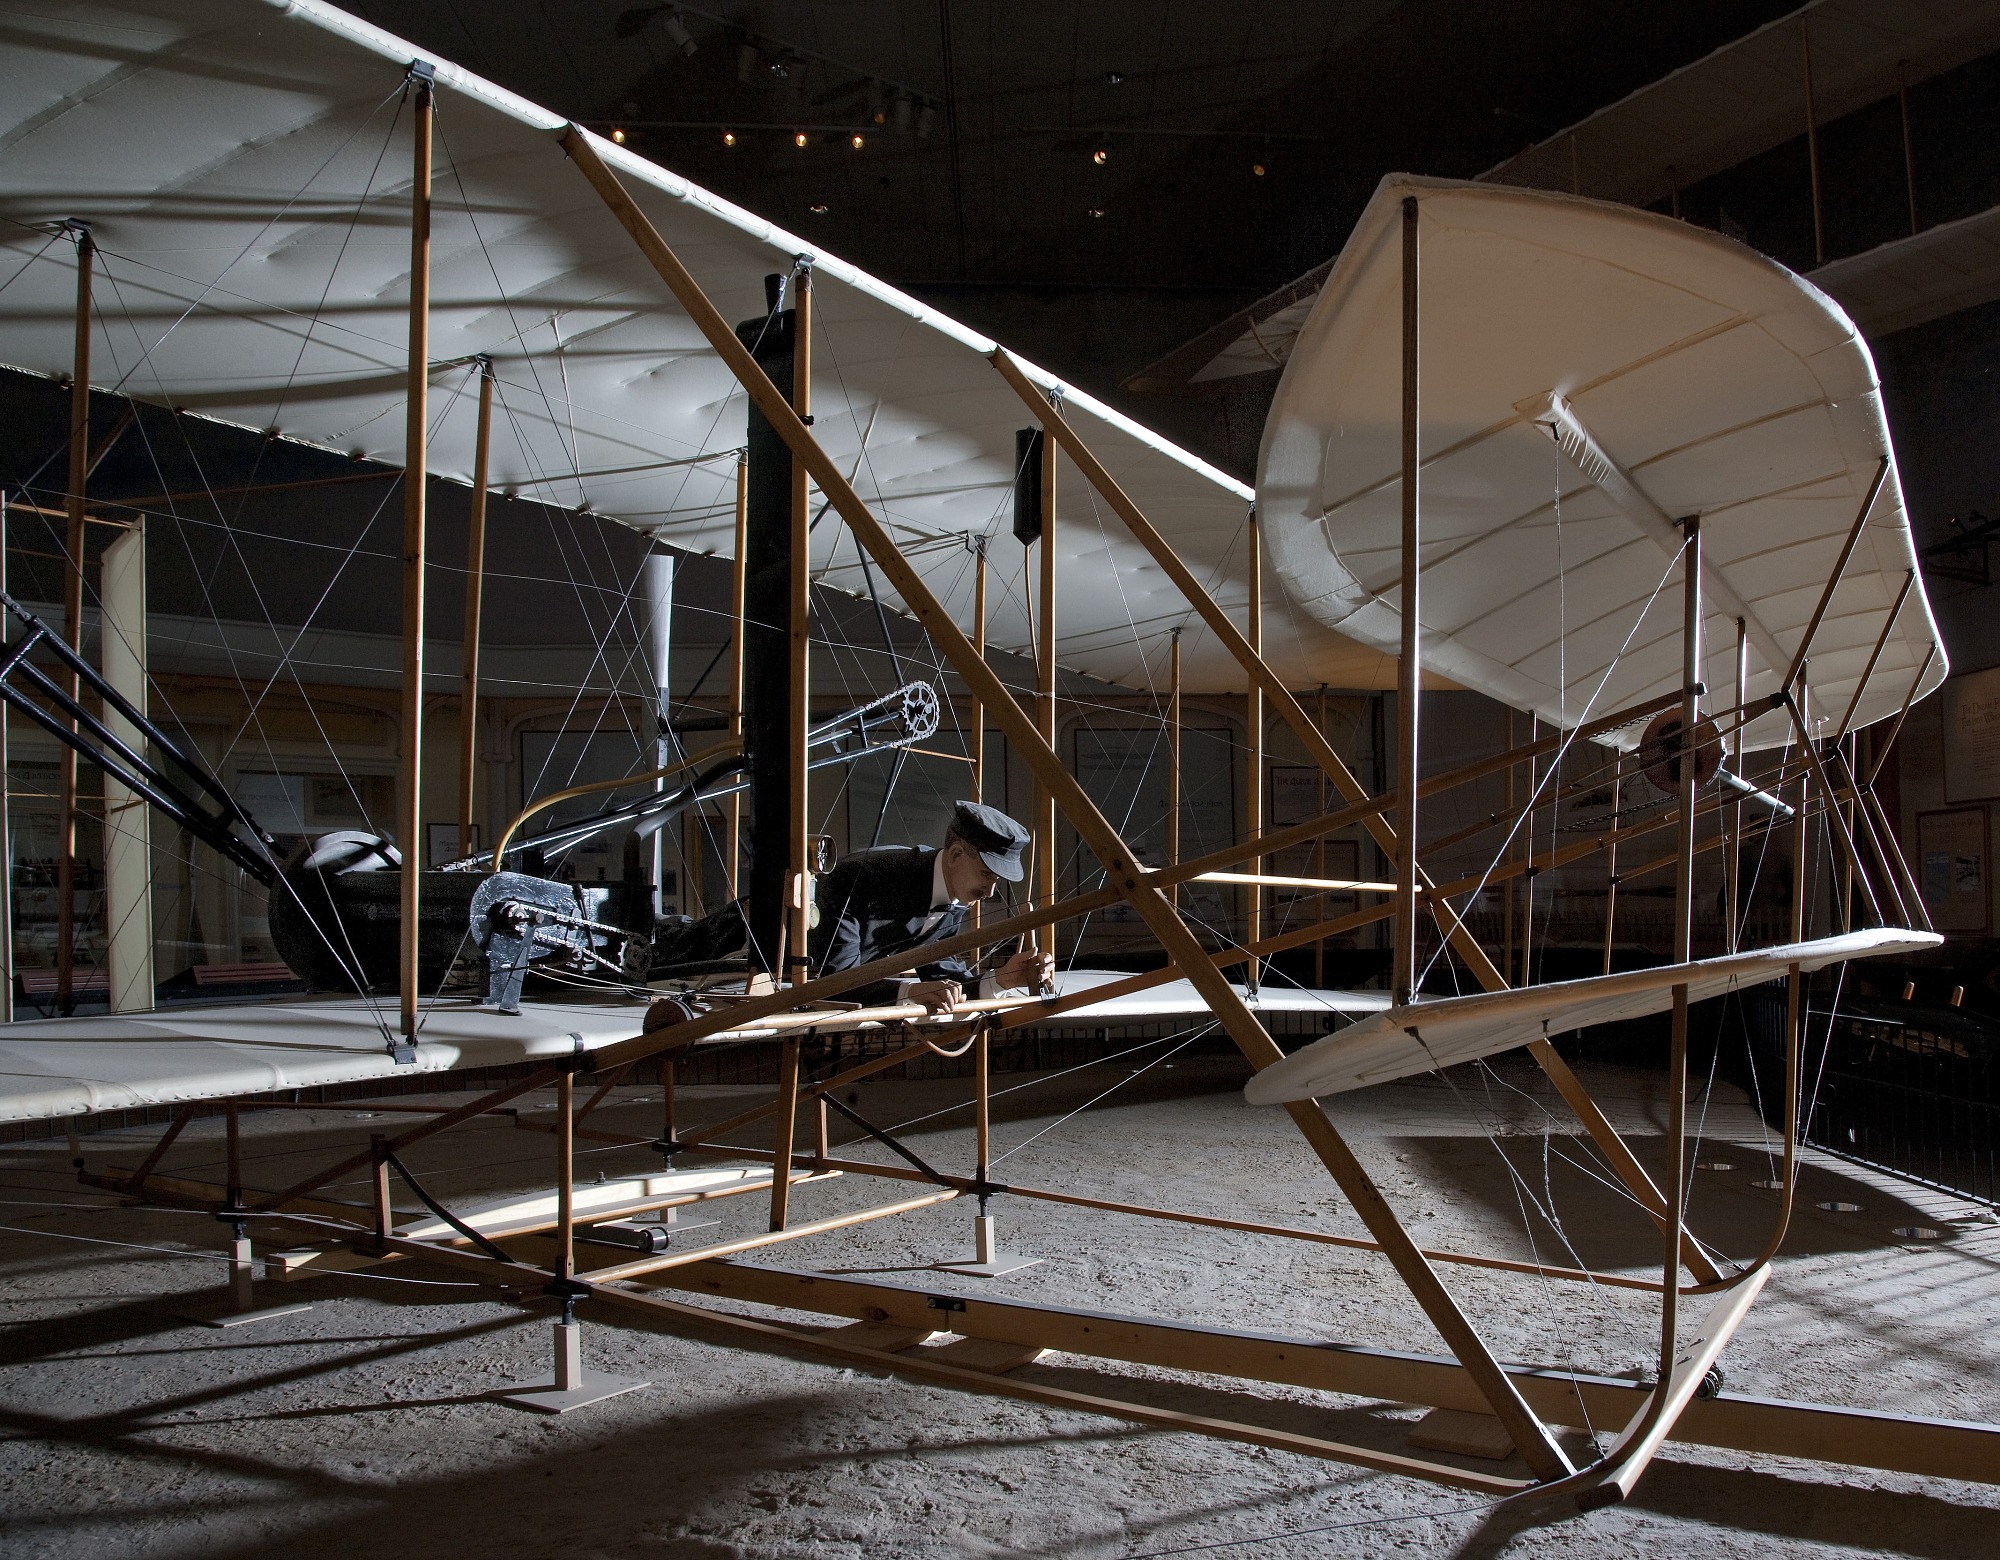 1903 Wright Flyer.